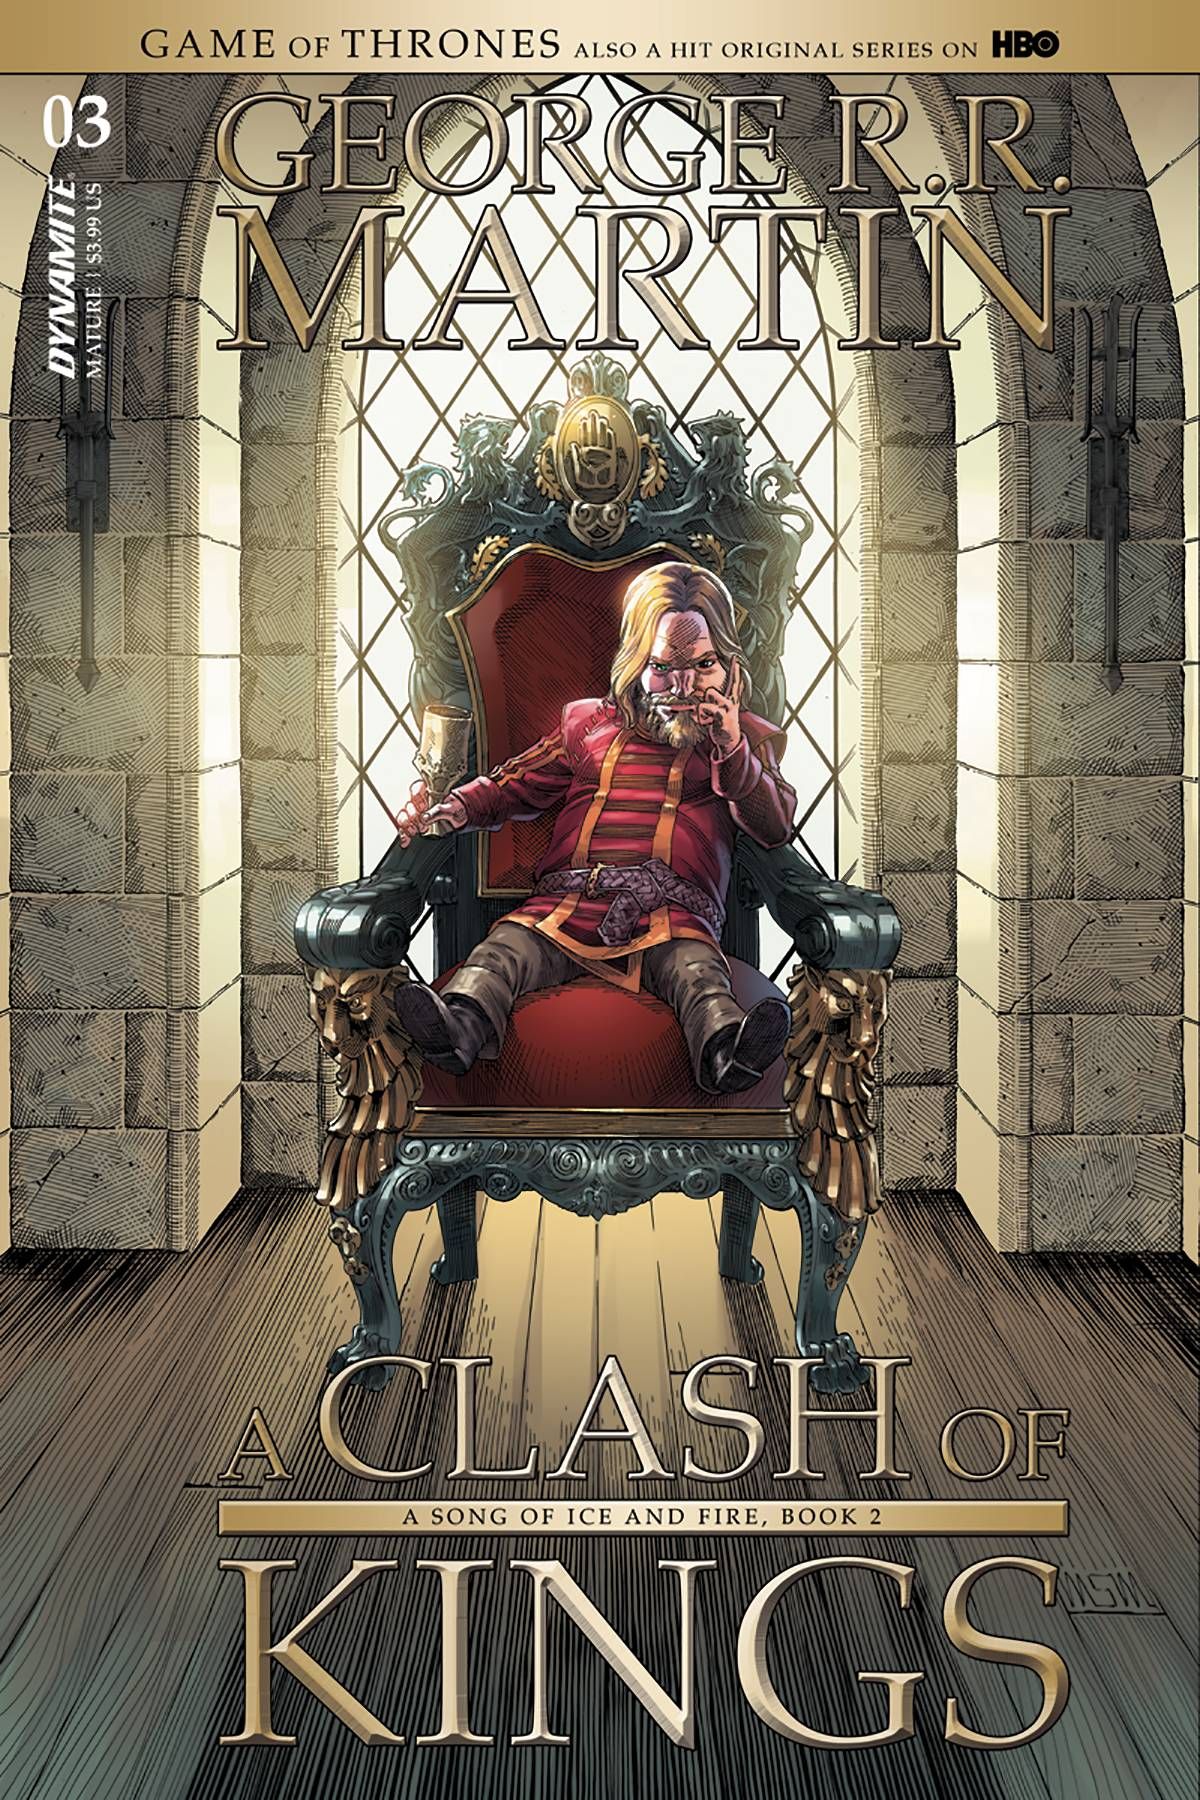 Game of Thrones: A Clash of Kings #3 Comic